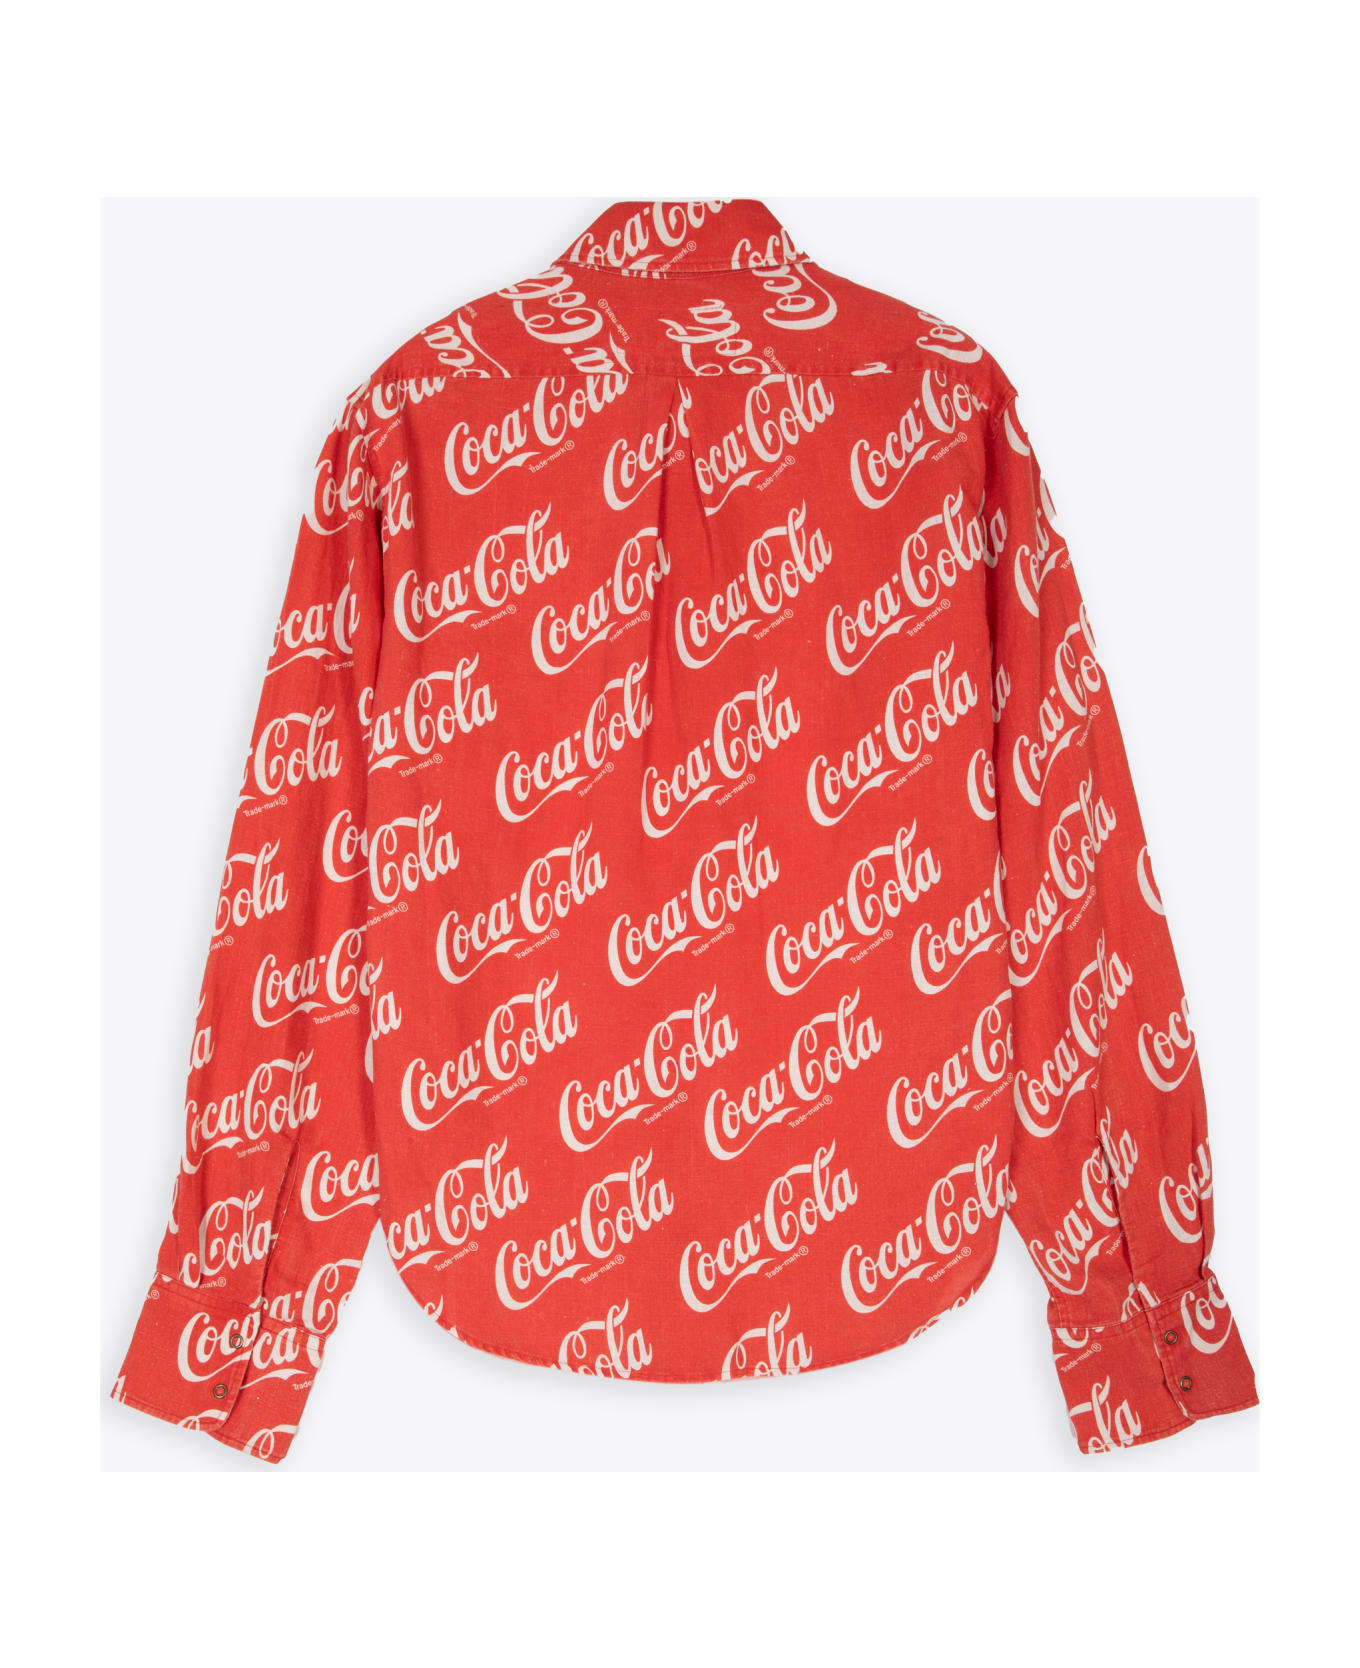 ERL Unisex Printed Button Up Shirt Woven Red linen blend Coca Cola shirt - Unisex Printed Button Up Shirt Woven - Rosso